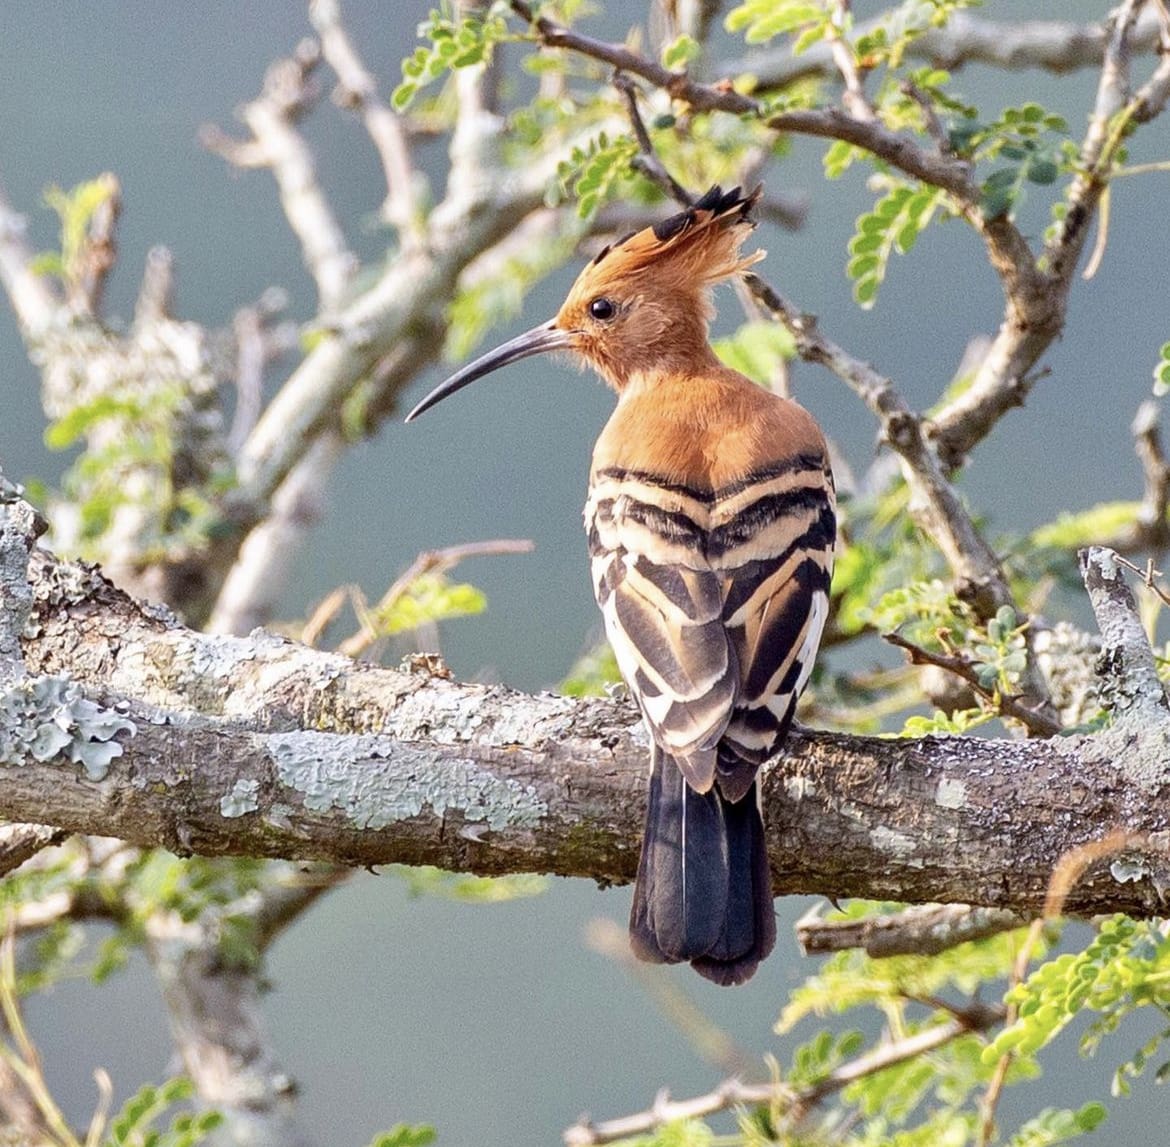 The African Hoopoe perched in a tree